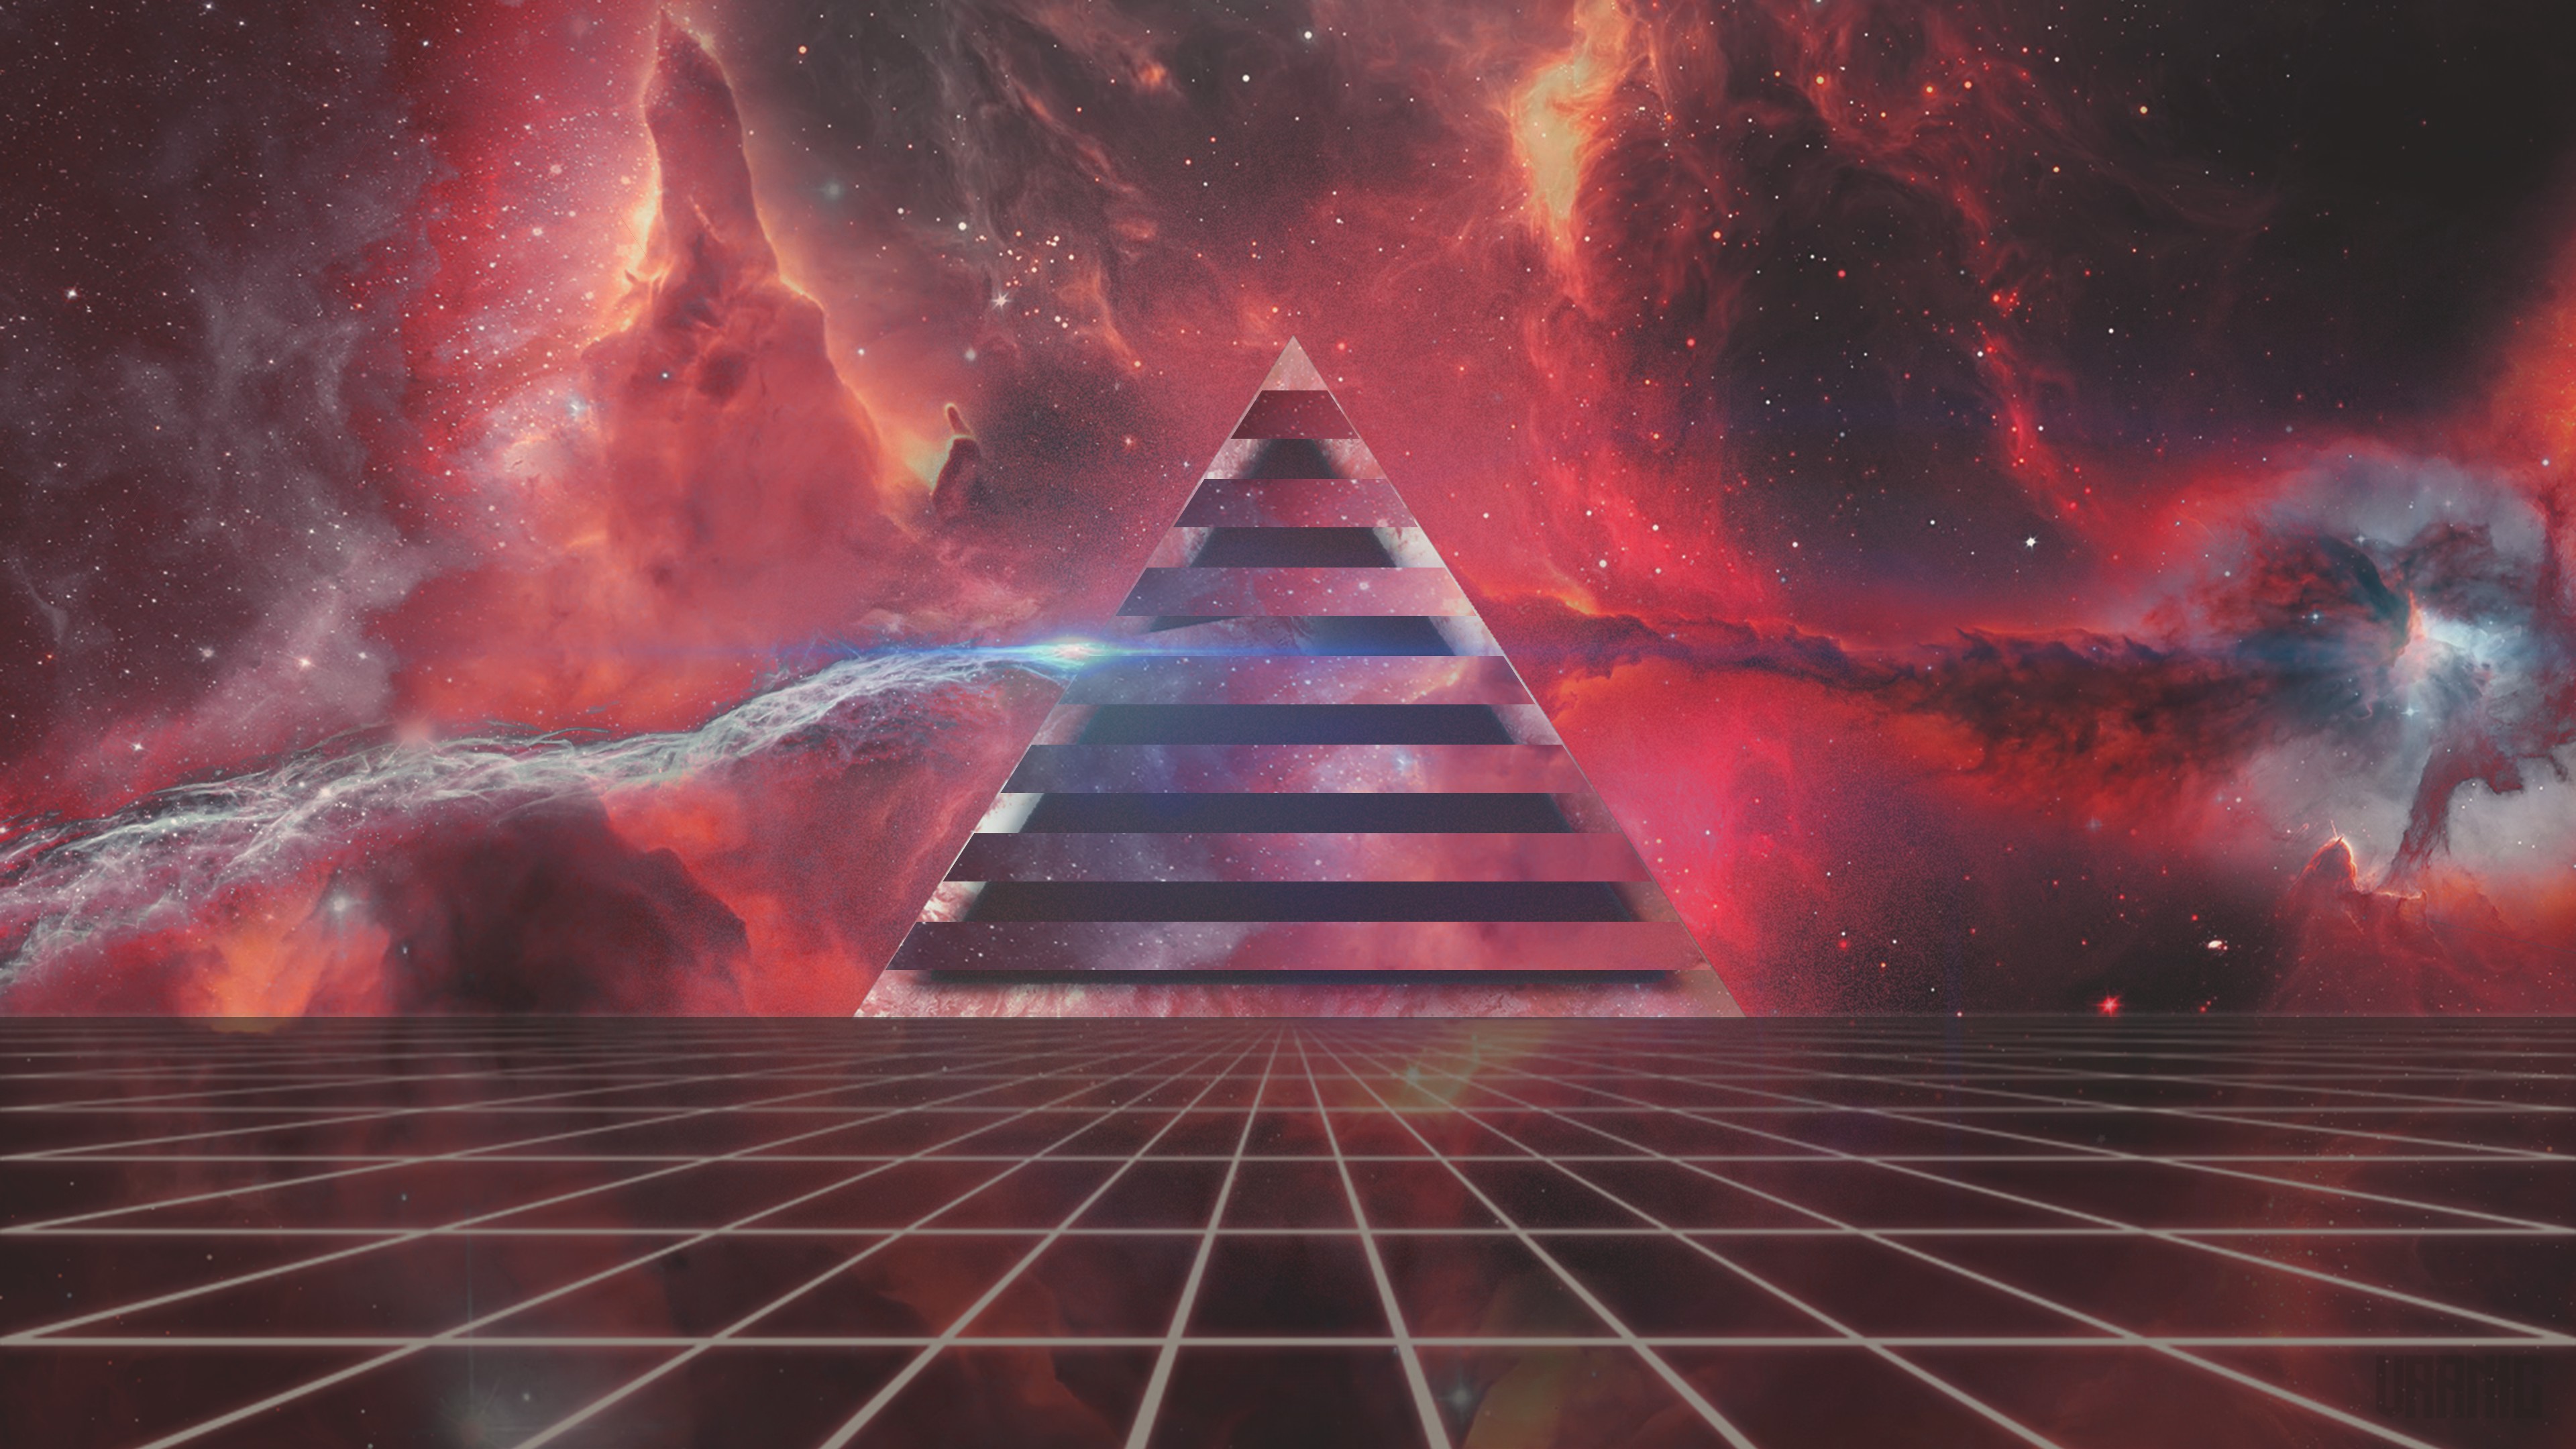 Retro Style The Dark Side Of The Moon Pink Floyd Triangle Neon Andromeda 3840x2160